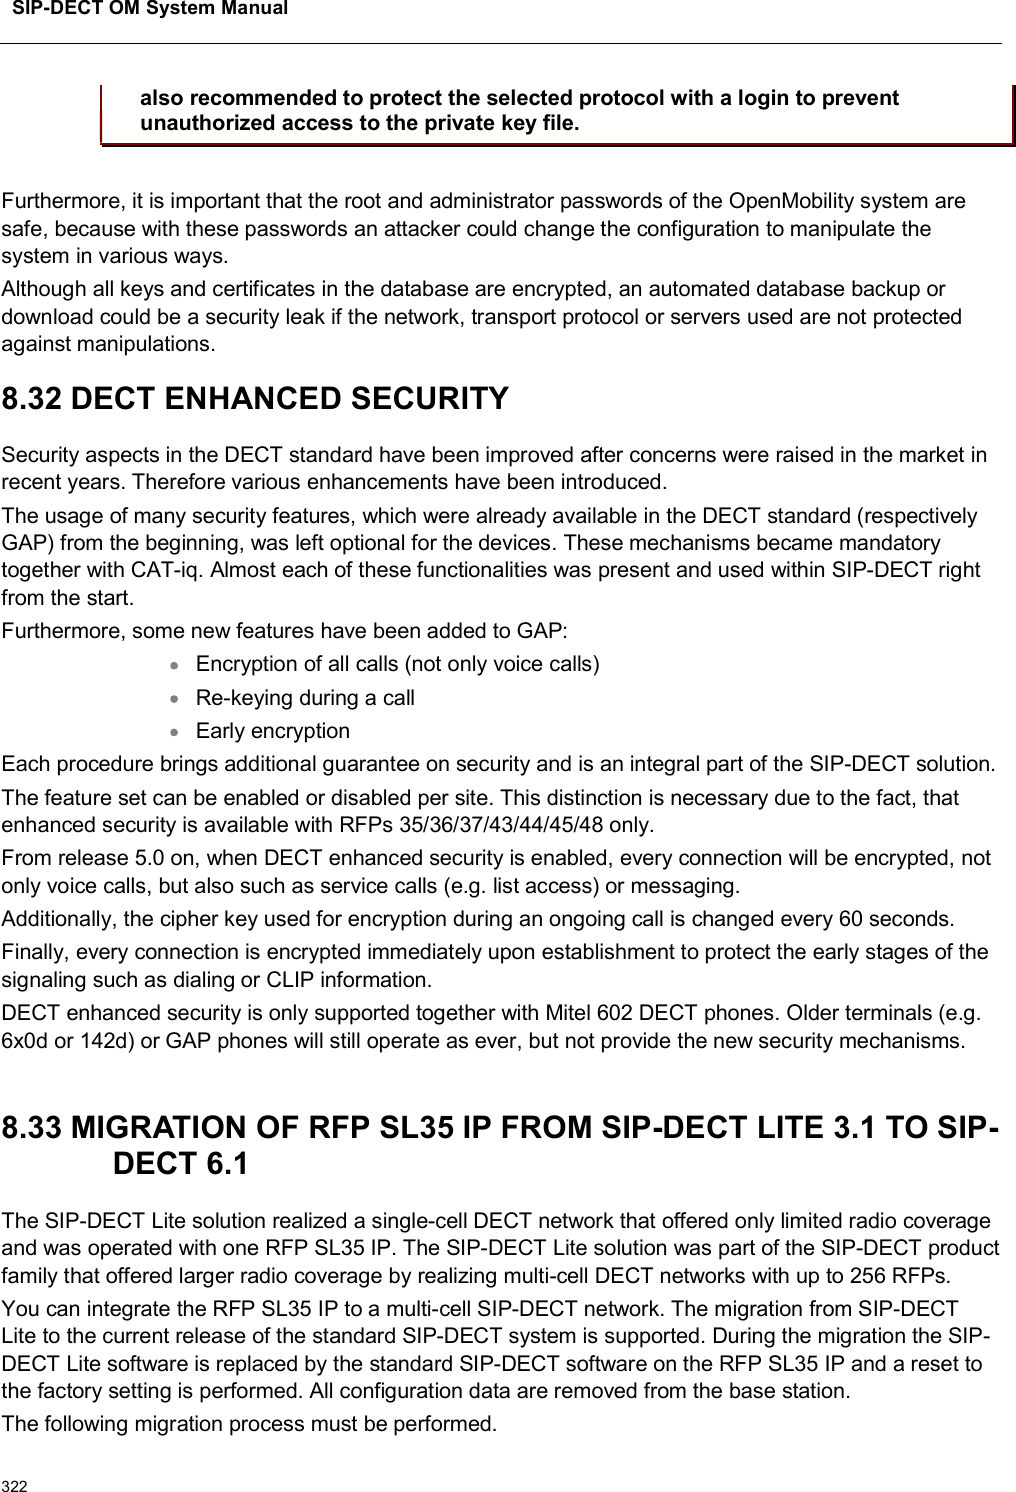 SIP-DECT OM System Manual322also recommended to protect the selected protocol with a login to prevent unauthorized access to the private key file.Furthermore, it is important that the root and administrator passwords of the OpenMobility system are safe, because with these passwords an attacker could change the configuration to manipulate the system in various ways.Although all keys and certificates in the database are encrypted, an automated database backup or download could be a security leak if the network, transport protocol or servers used are not protected against manipulations.8.32 DECT ENHANCED SECURITYSecurity aspects in the DECT standard have been improved after concerns were raised in the market in recent years. Therefore various enhancements have been introduced.The usage of many security features, which were already available in the DECT standard (respectively GAP) from the beginning, was left optional for the devices. These mechanisms became mandatory together with CAT-iq. Almost each of these functionalities was present and used within SIP-DECT right from the start.Furthermore, some new features have been added to GAP:Encryption of all calls (not only voice calls)Re-keying during a callEarly encryptionEach procedure brings additional guarantee on security and is an integral part of the SIP-DECT solution.The feature set can be enabled or disabled per site. This distinction is necessary due to the fact, that enhanced security is available with RFPs 35/36/37/43/44/45/48 only.From release 5.0 on, when DECT enhanced security is enabled, every connection will be encrypted, not only voice calls, but also such as service calls (e.g. list access) or messaging.Additionally, the cipher key used for encryption during an ongoing call is changed every 60 seconds.Finally, every connection is encrypted immediately upon establishment to protect the early stages of the signaling such as dialing or CLIP information.DECT enhanced security is only supported together with Mitel 602 DECT phones. Older terminals (e.g. 6x0d or 142d) or GAP phones will still operate as ever, but not provide the new security mechanisms.8.33 MIGRATION OF RFP SL35 IP FROM SIP-DECT LITE 3.1 TO SIP-DECT 6.1The SIP-DECT Lite solution realized a single-cell DECT network that offered only limited radio coverage and was operated with one RFP SL35 IP. The SIP-DECT Lite solution was part of the SIP-DECT product family that offered larger radio coverage by realizing multi-cell DECT networks with up to 256 RFPs. You can integrate the RFP SL35 IP to a multi-cell SIP-DECT network. The migration from SIP-DECTLite to the current release of the standard SIP-DECT system is supported. During the migration the SIP-DECT Lite software is replaced by the standard SIP-DECT software on the RFP SL35 IP and a reset to the factory setting is performed. All configuration data are removed from the base station.The following migration process must be performed.